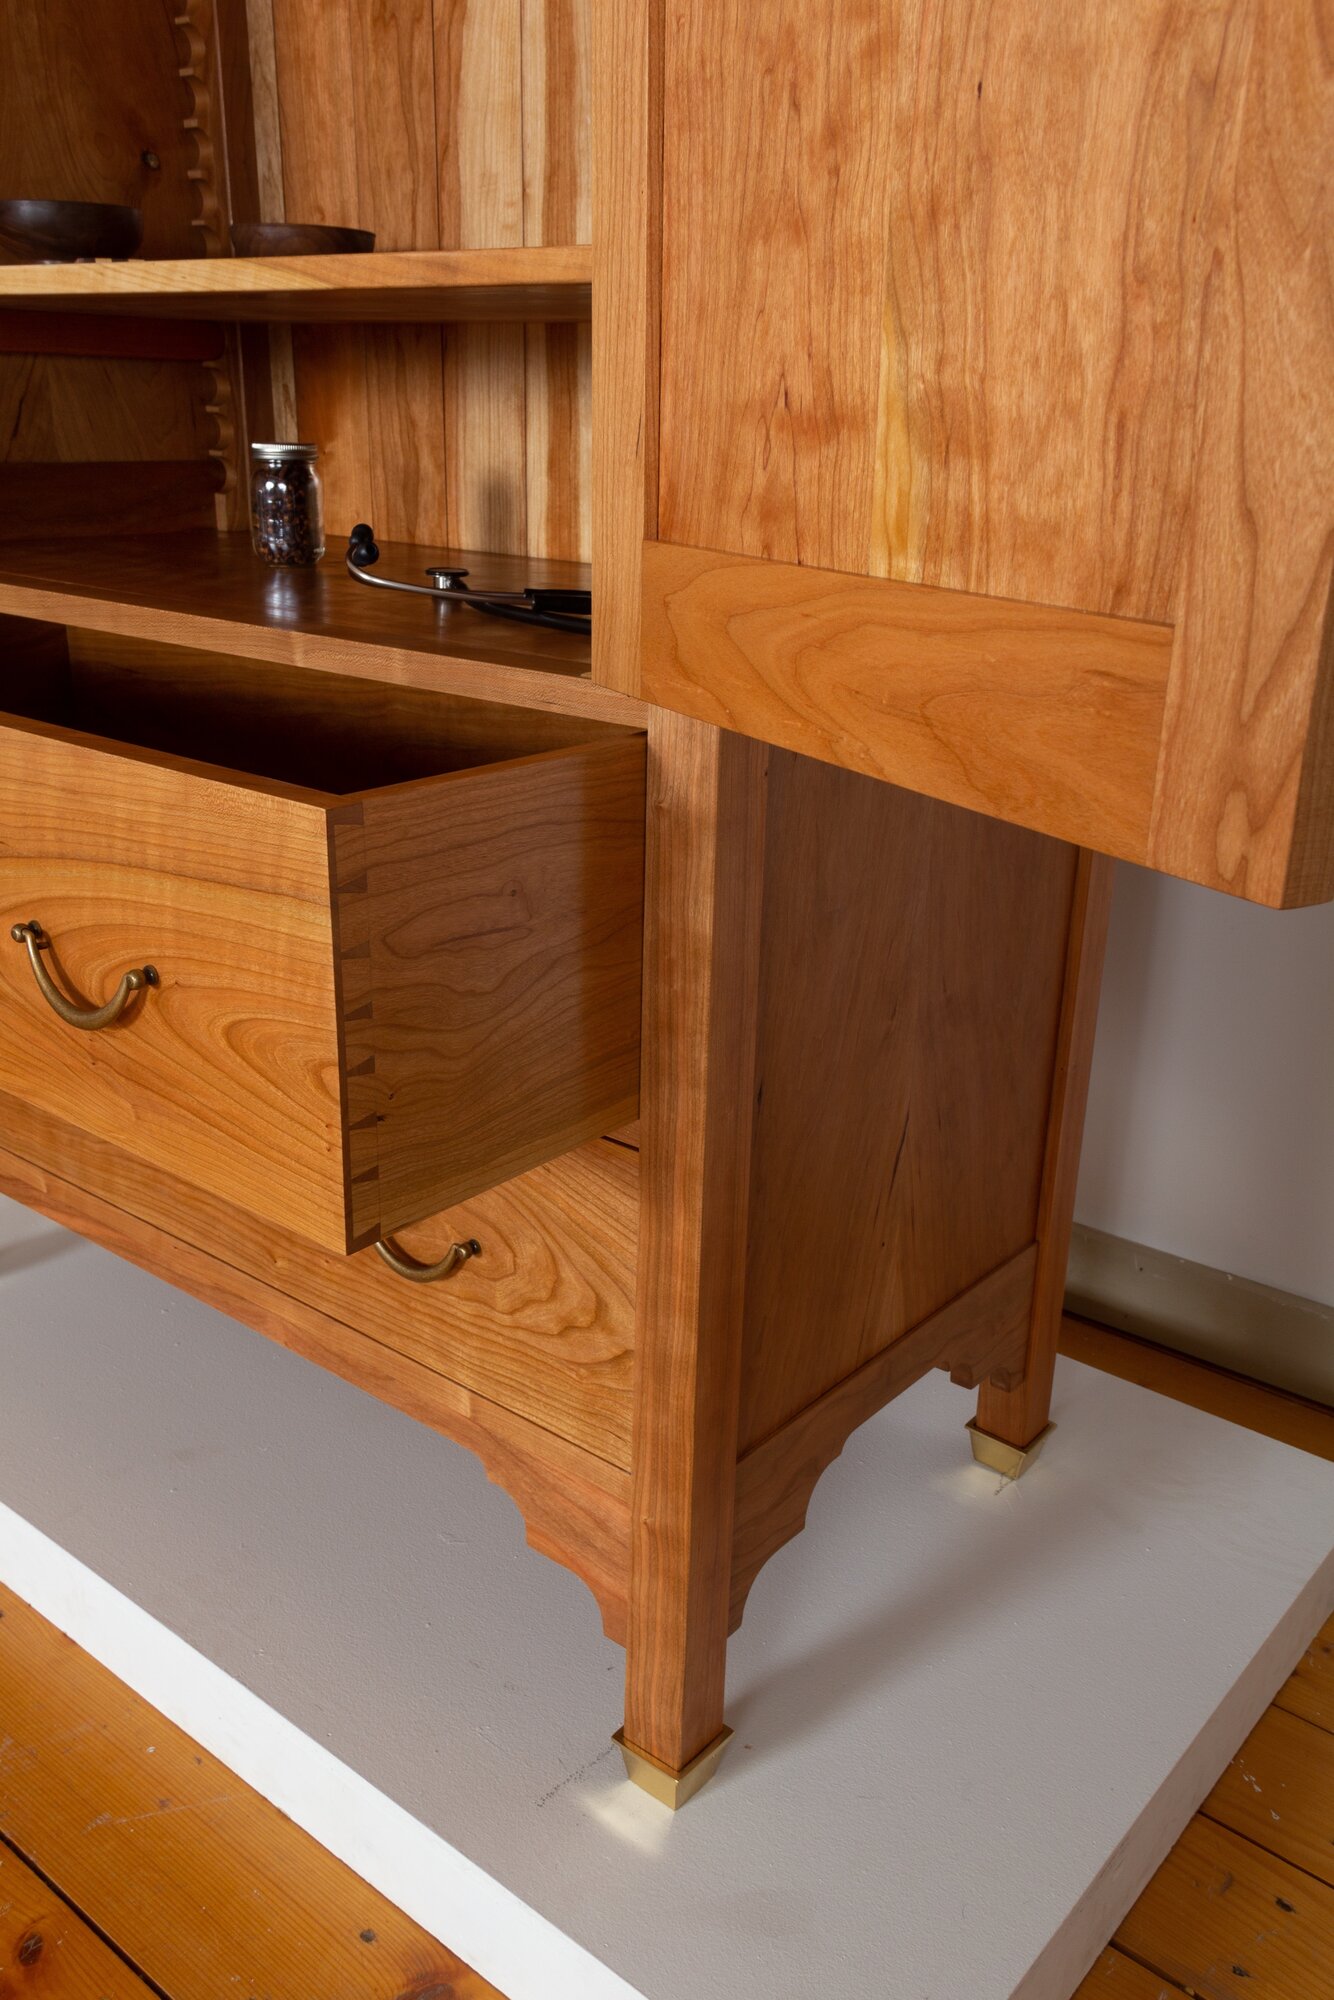 Midwife's Chest of Drawers Right Drawer Dovetail Detail